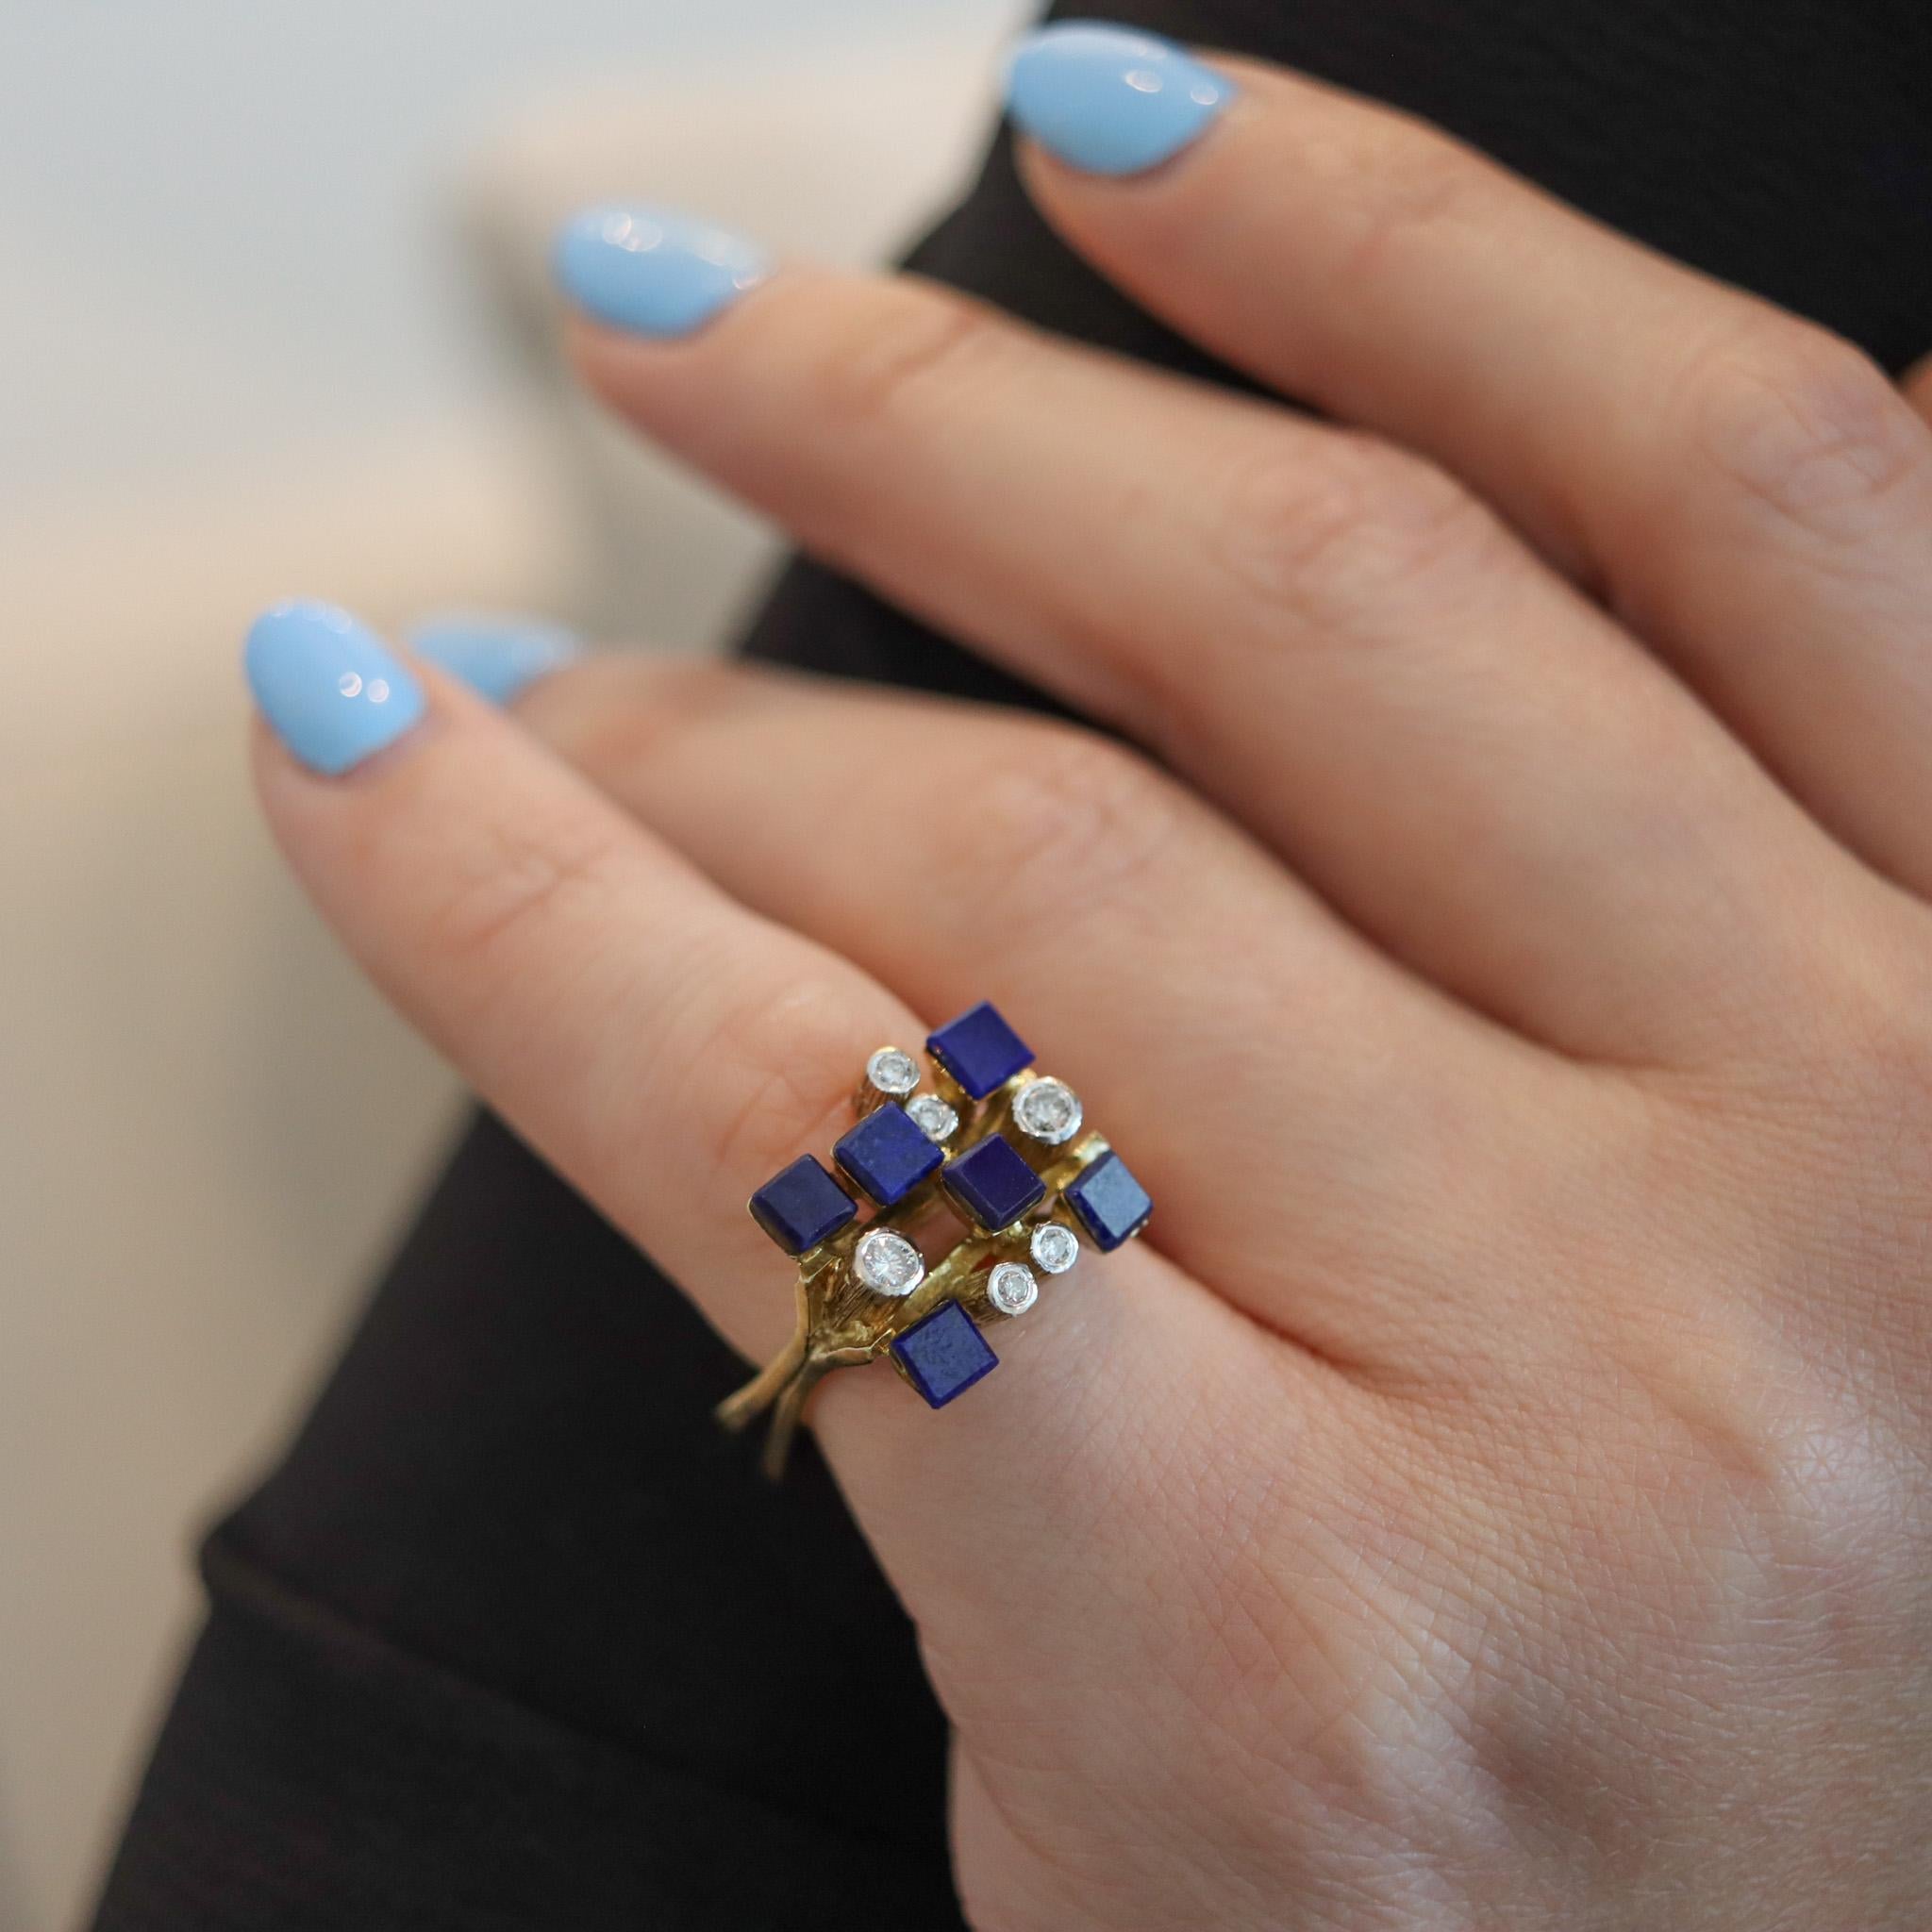 Danish 1970 Geometric Ring In 14Kt Yellow Gold With Diamonds And Lapis Lazuli For Sale 4